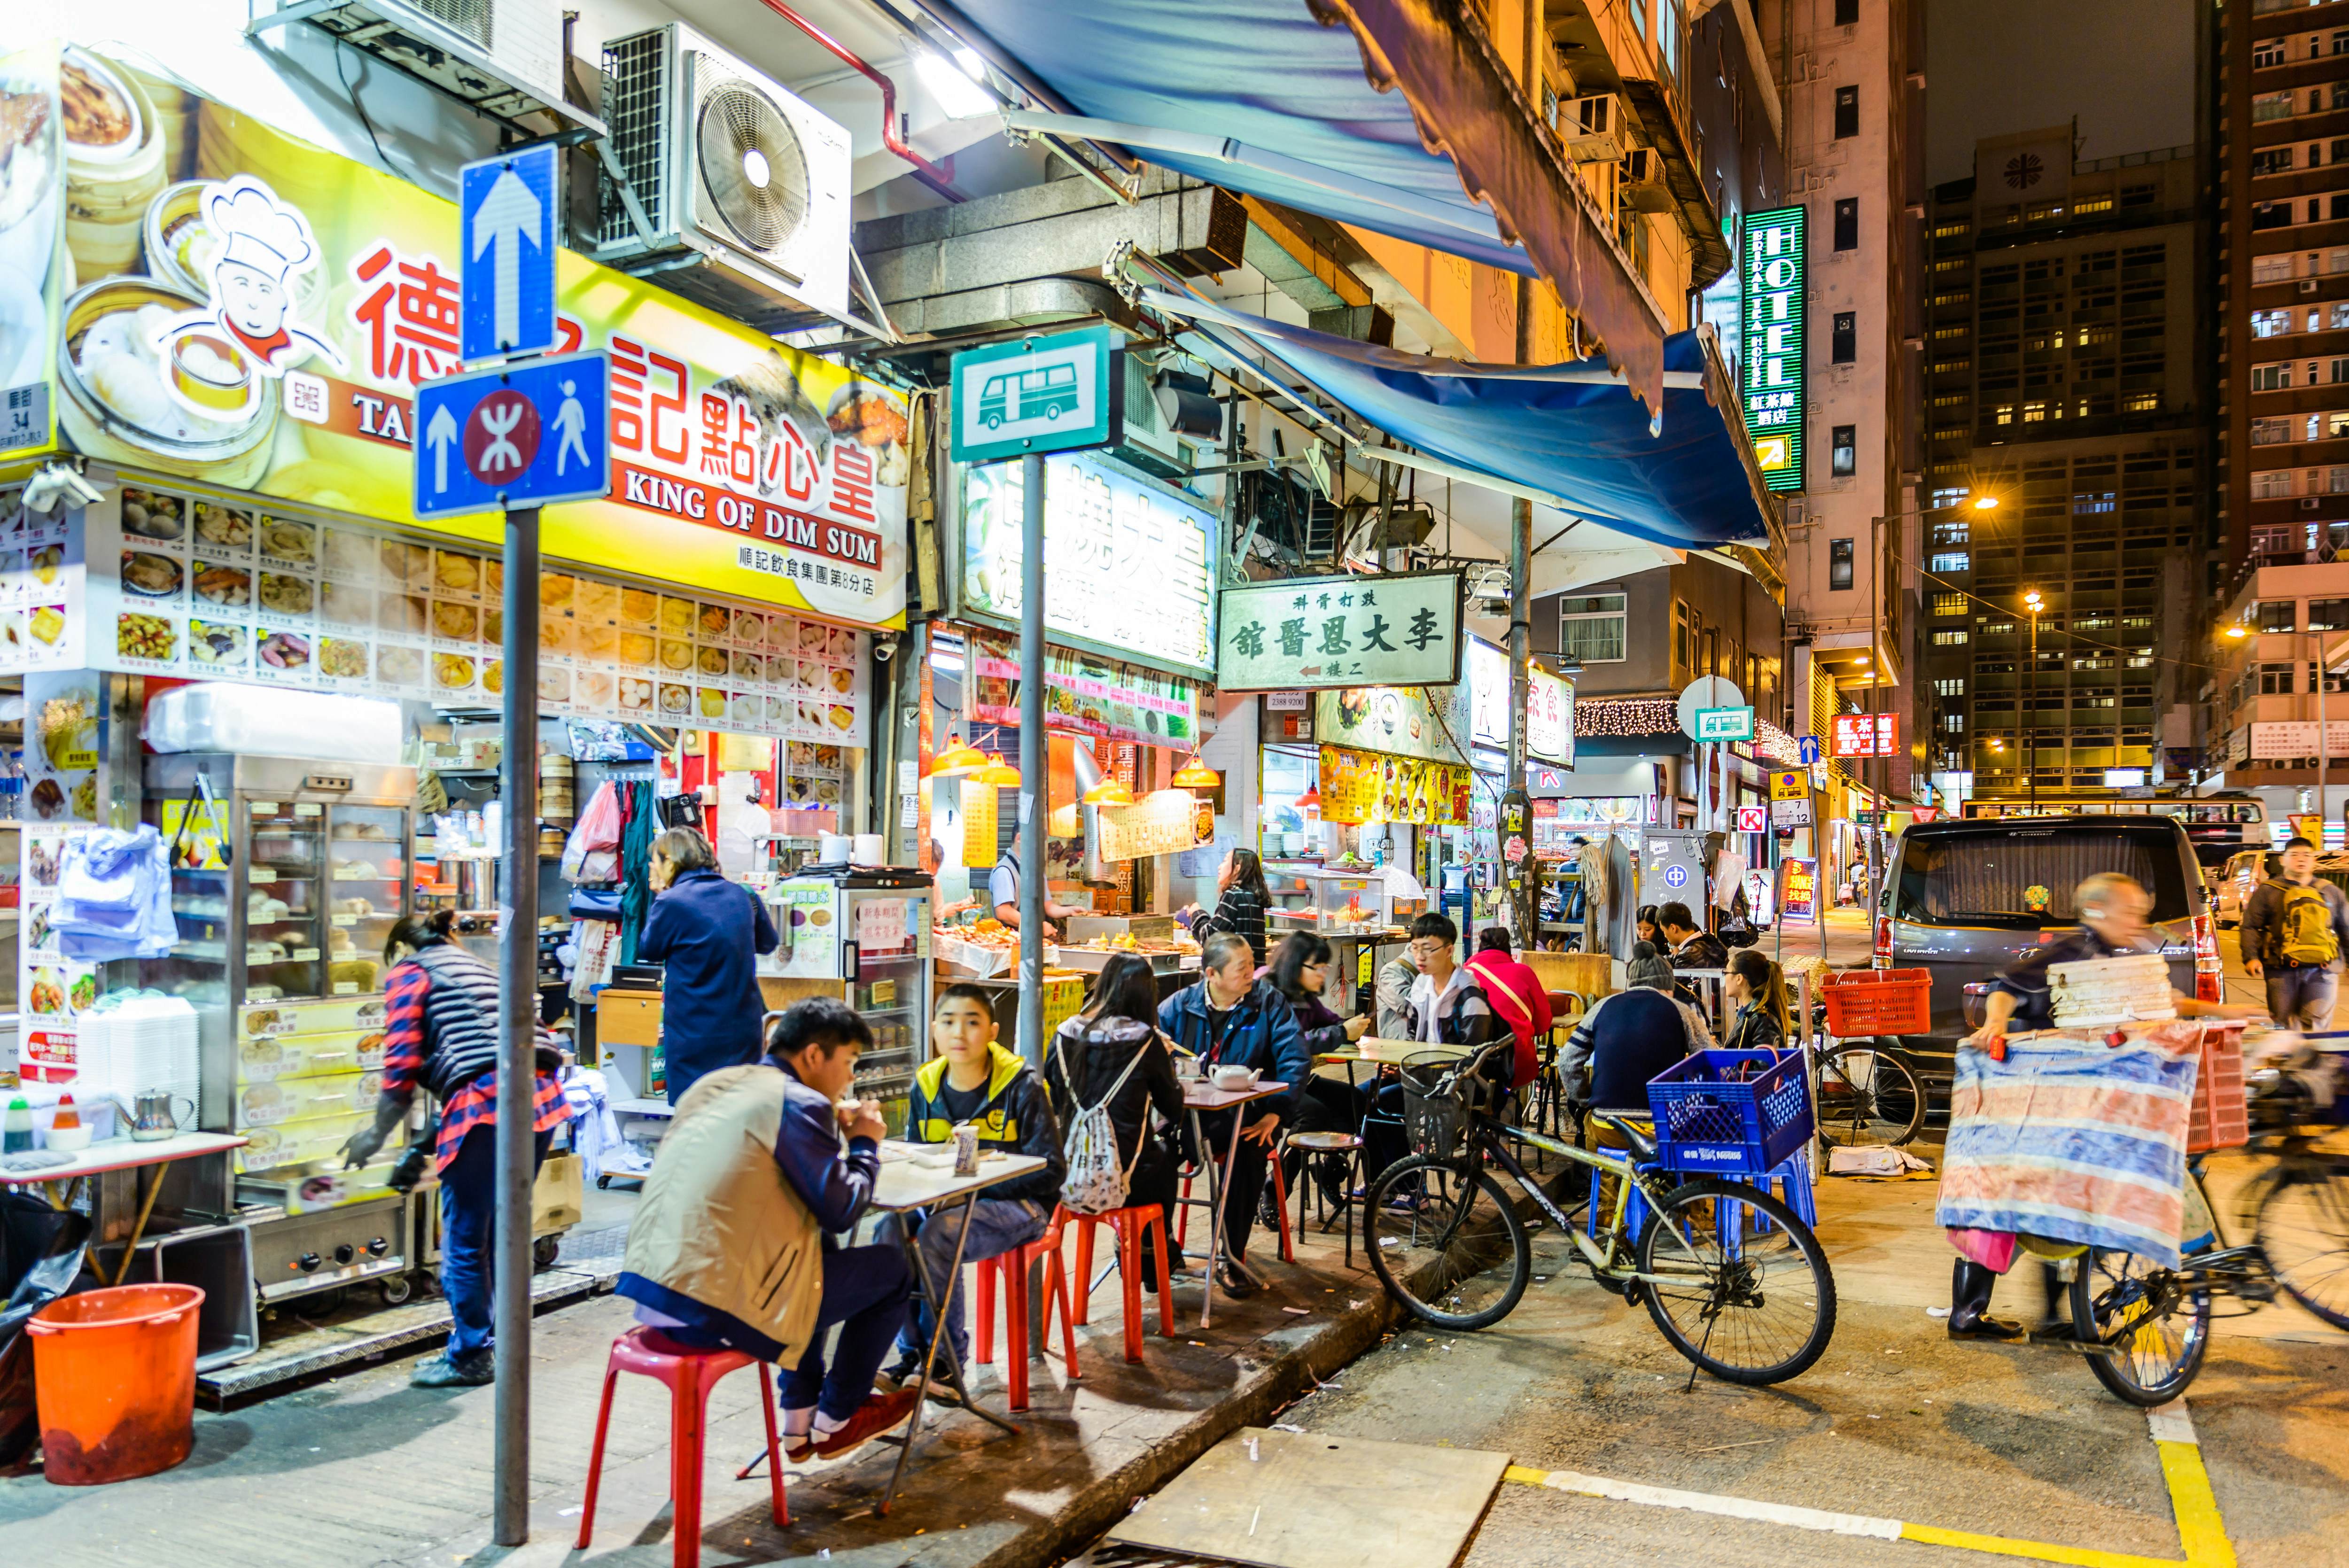 Hong Kong travel - Lonely Planet